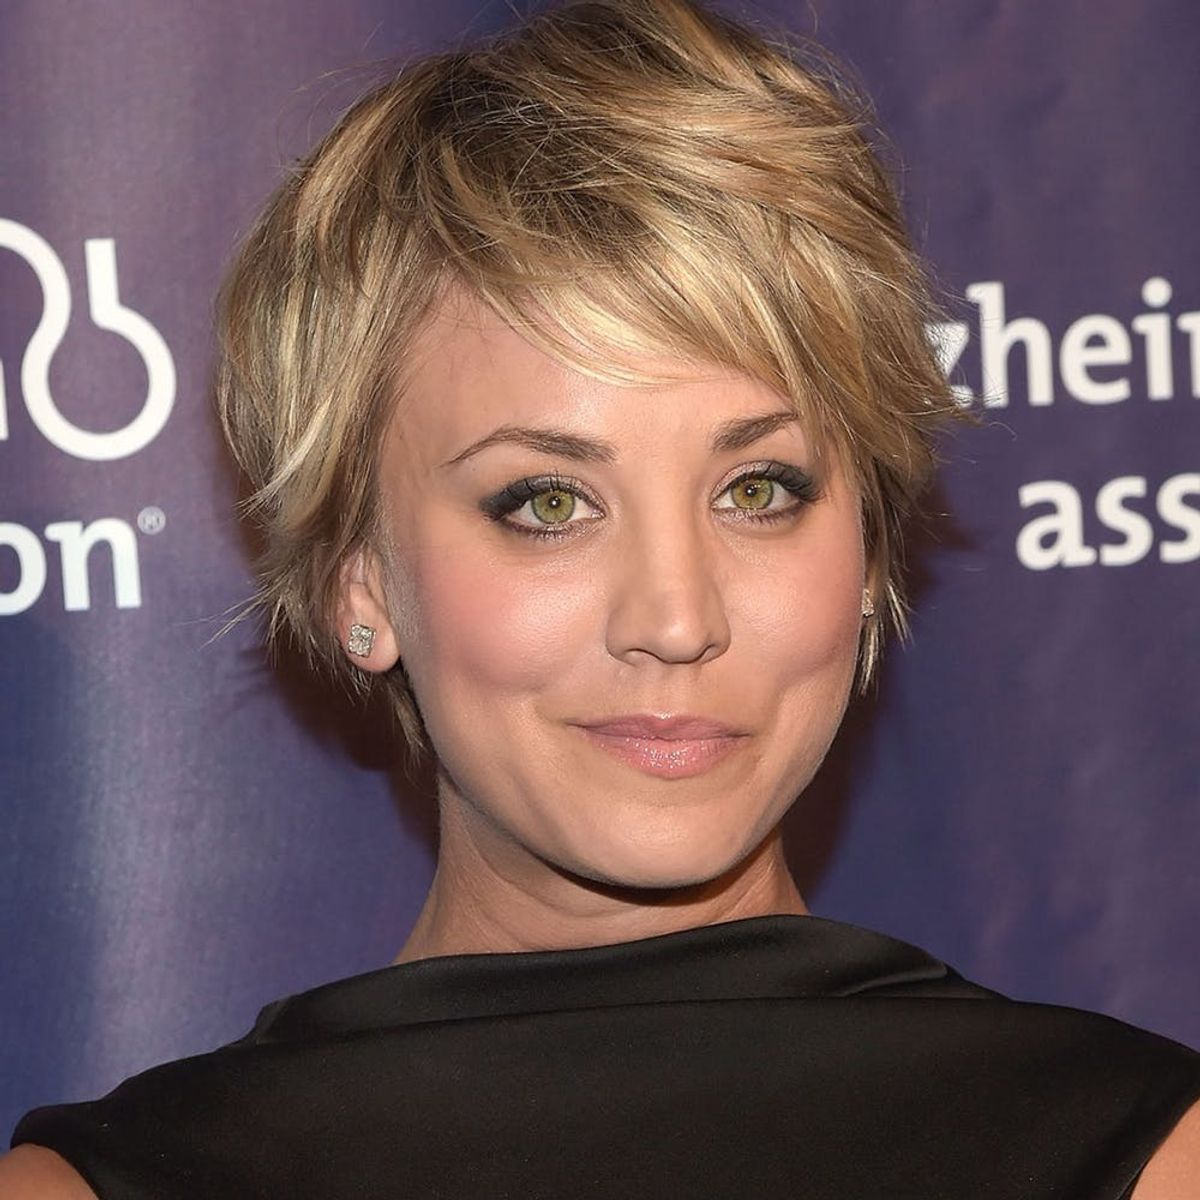 Kaley Cuoco’s New ‘Do Will Make You Want to Dye Your Hair Pink